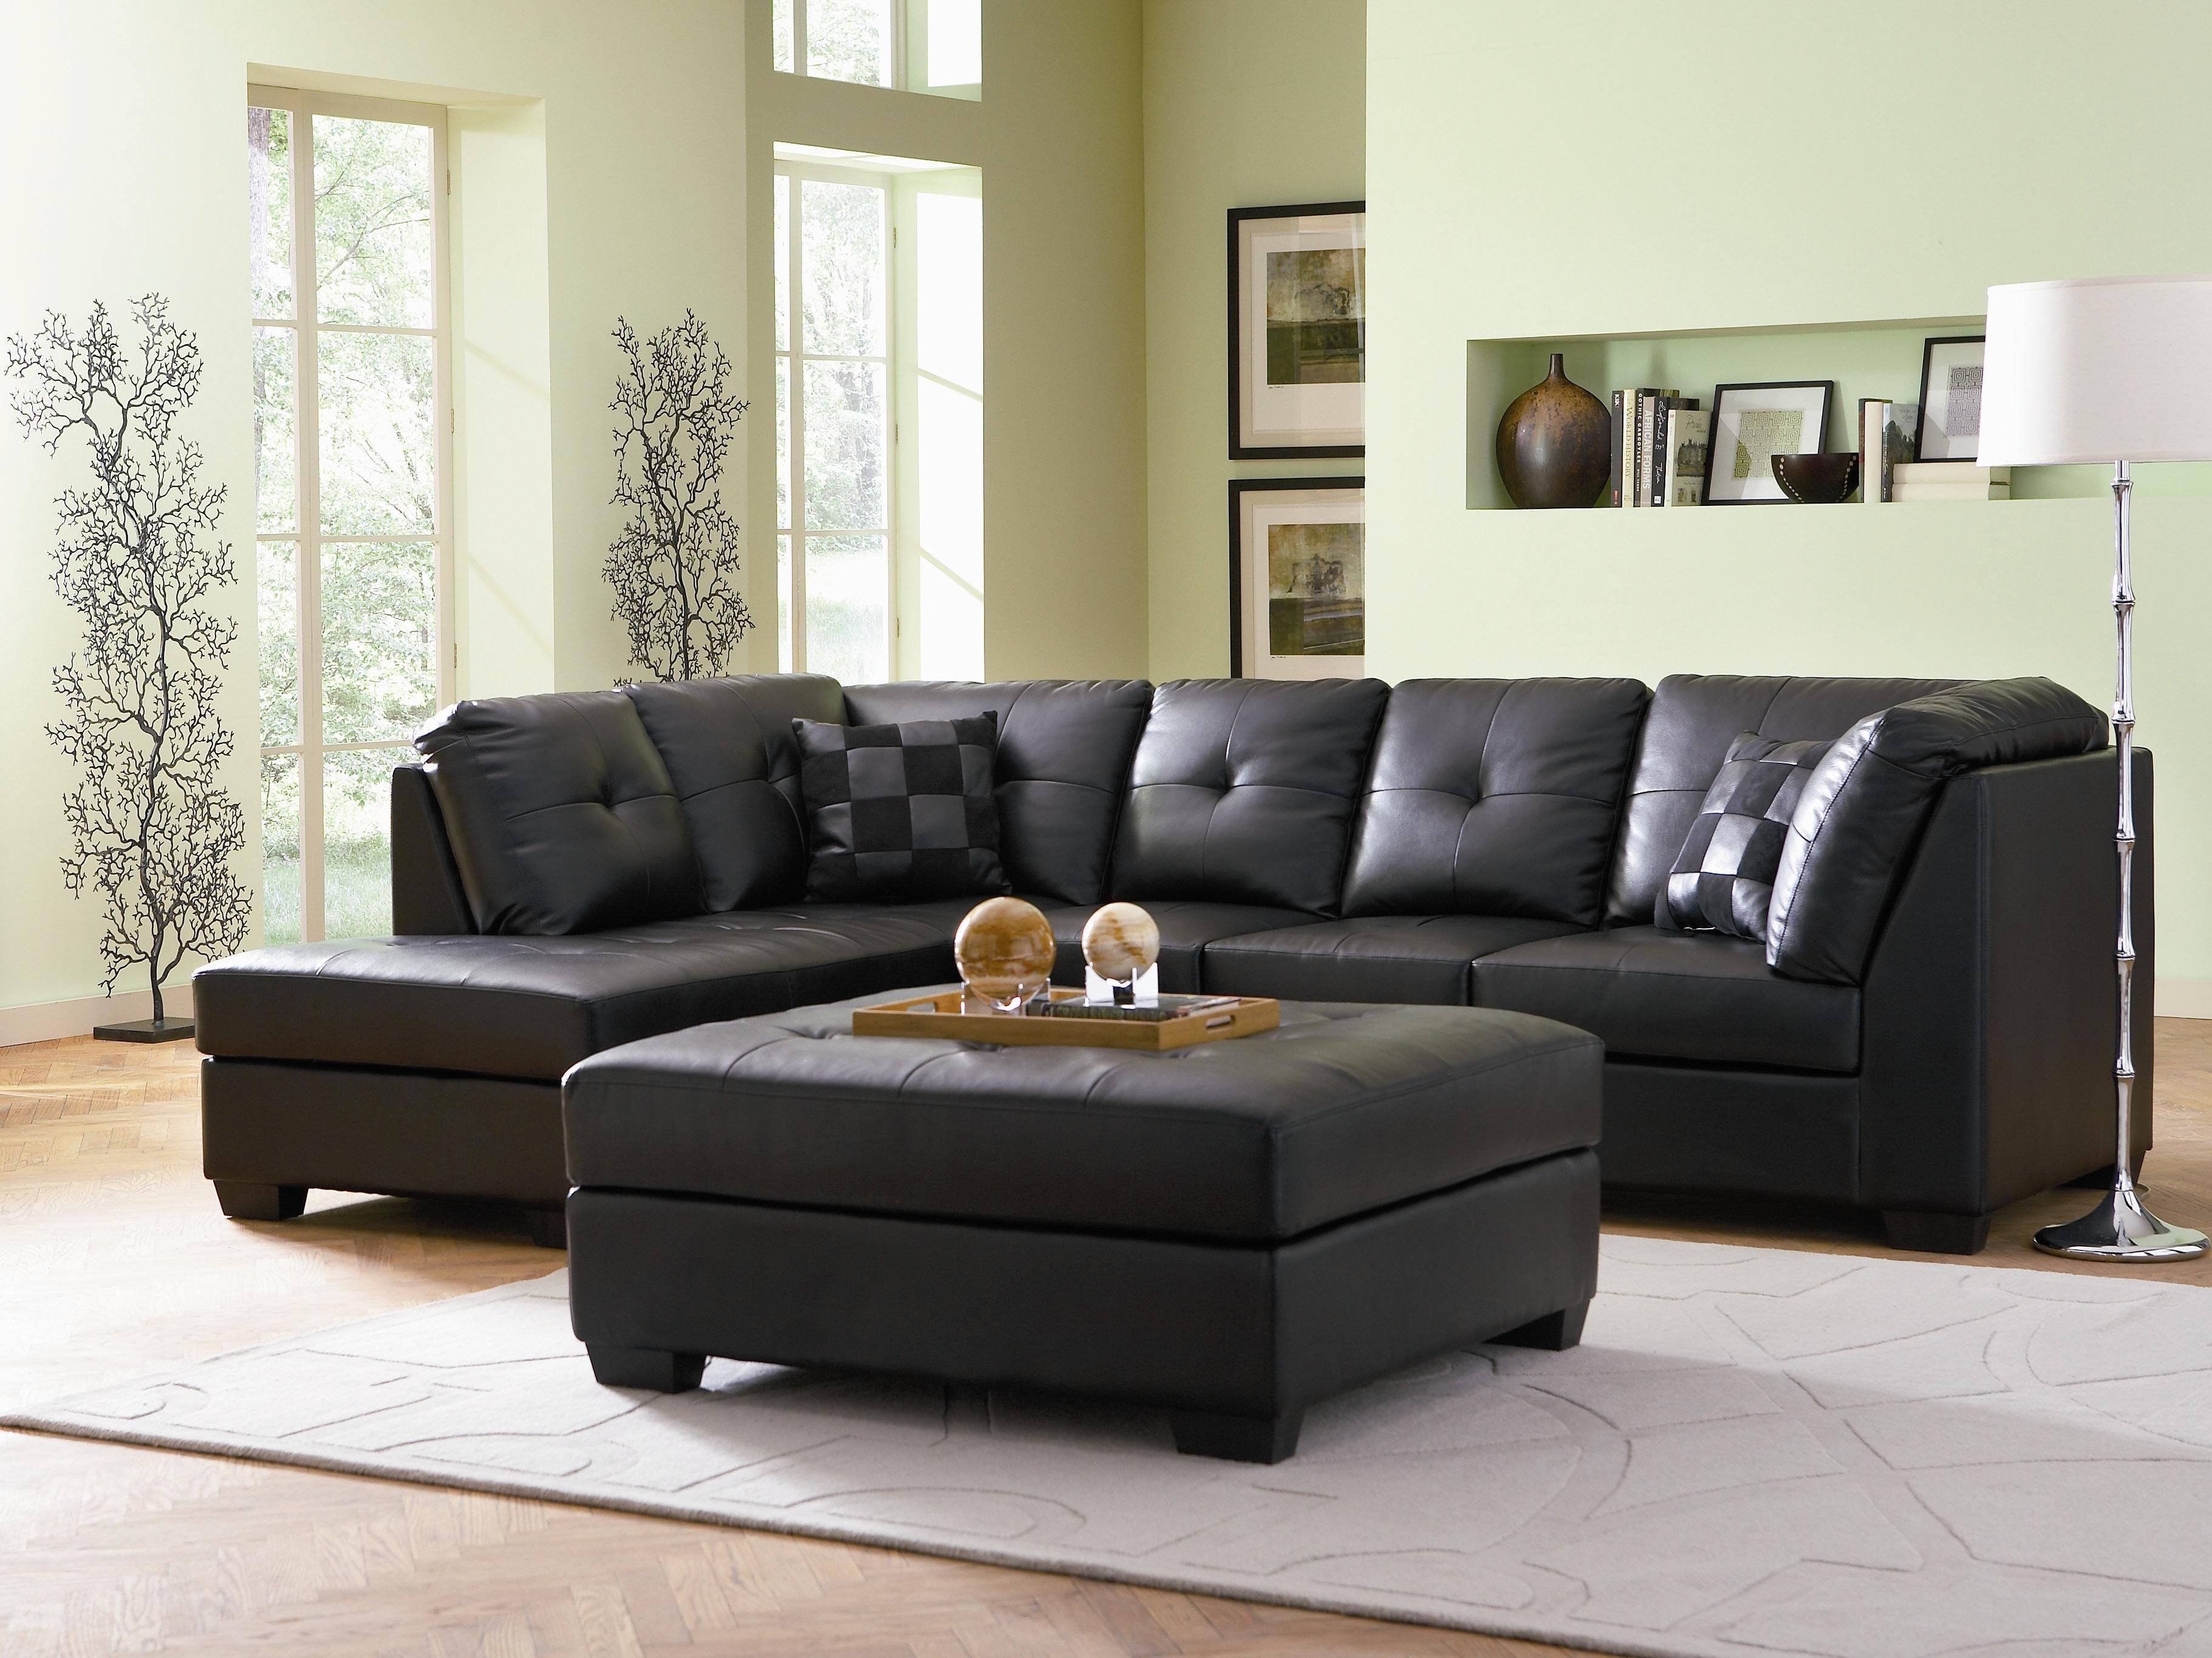 Darie Contemporary Style Black Bonded Leather Sofa Sectional W In Black Leather Sectionals With Ottoman (View 11 of 15)